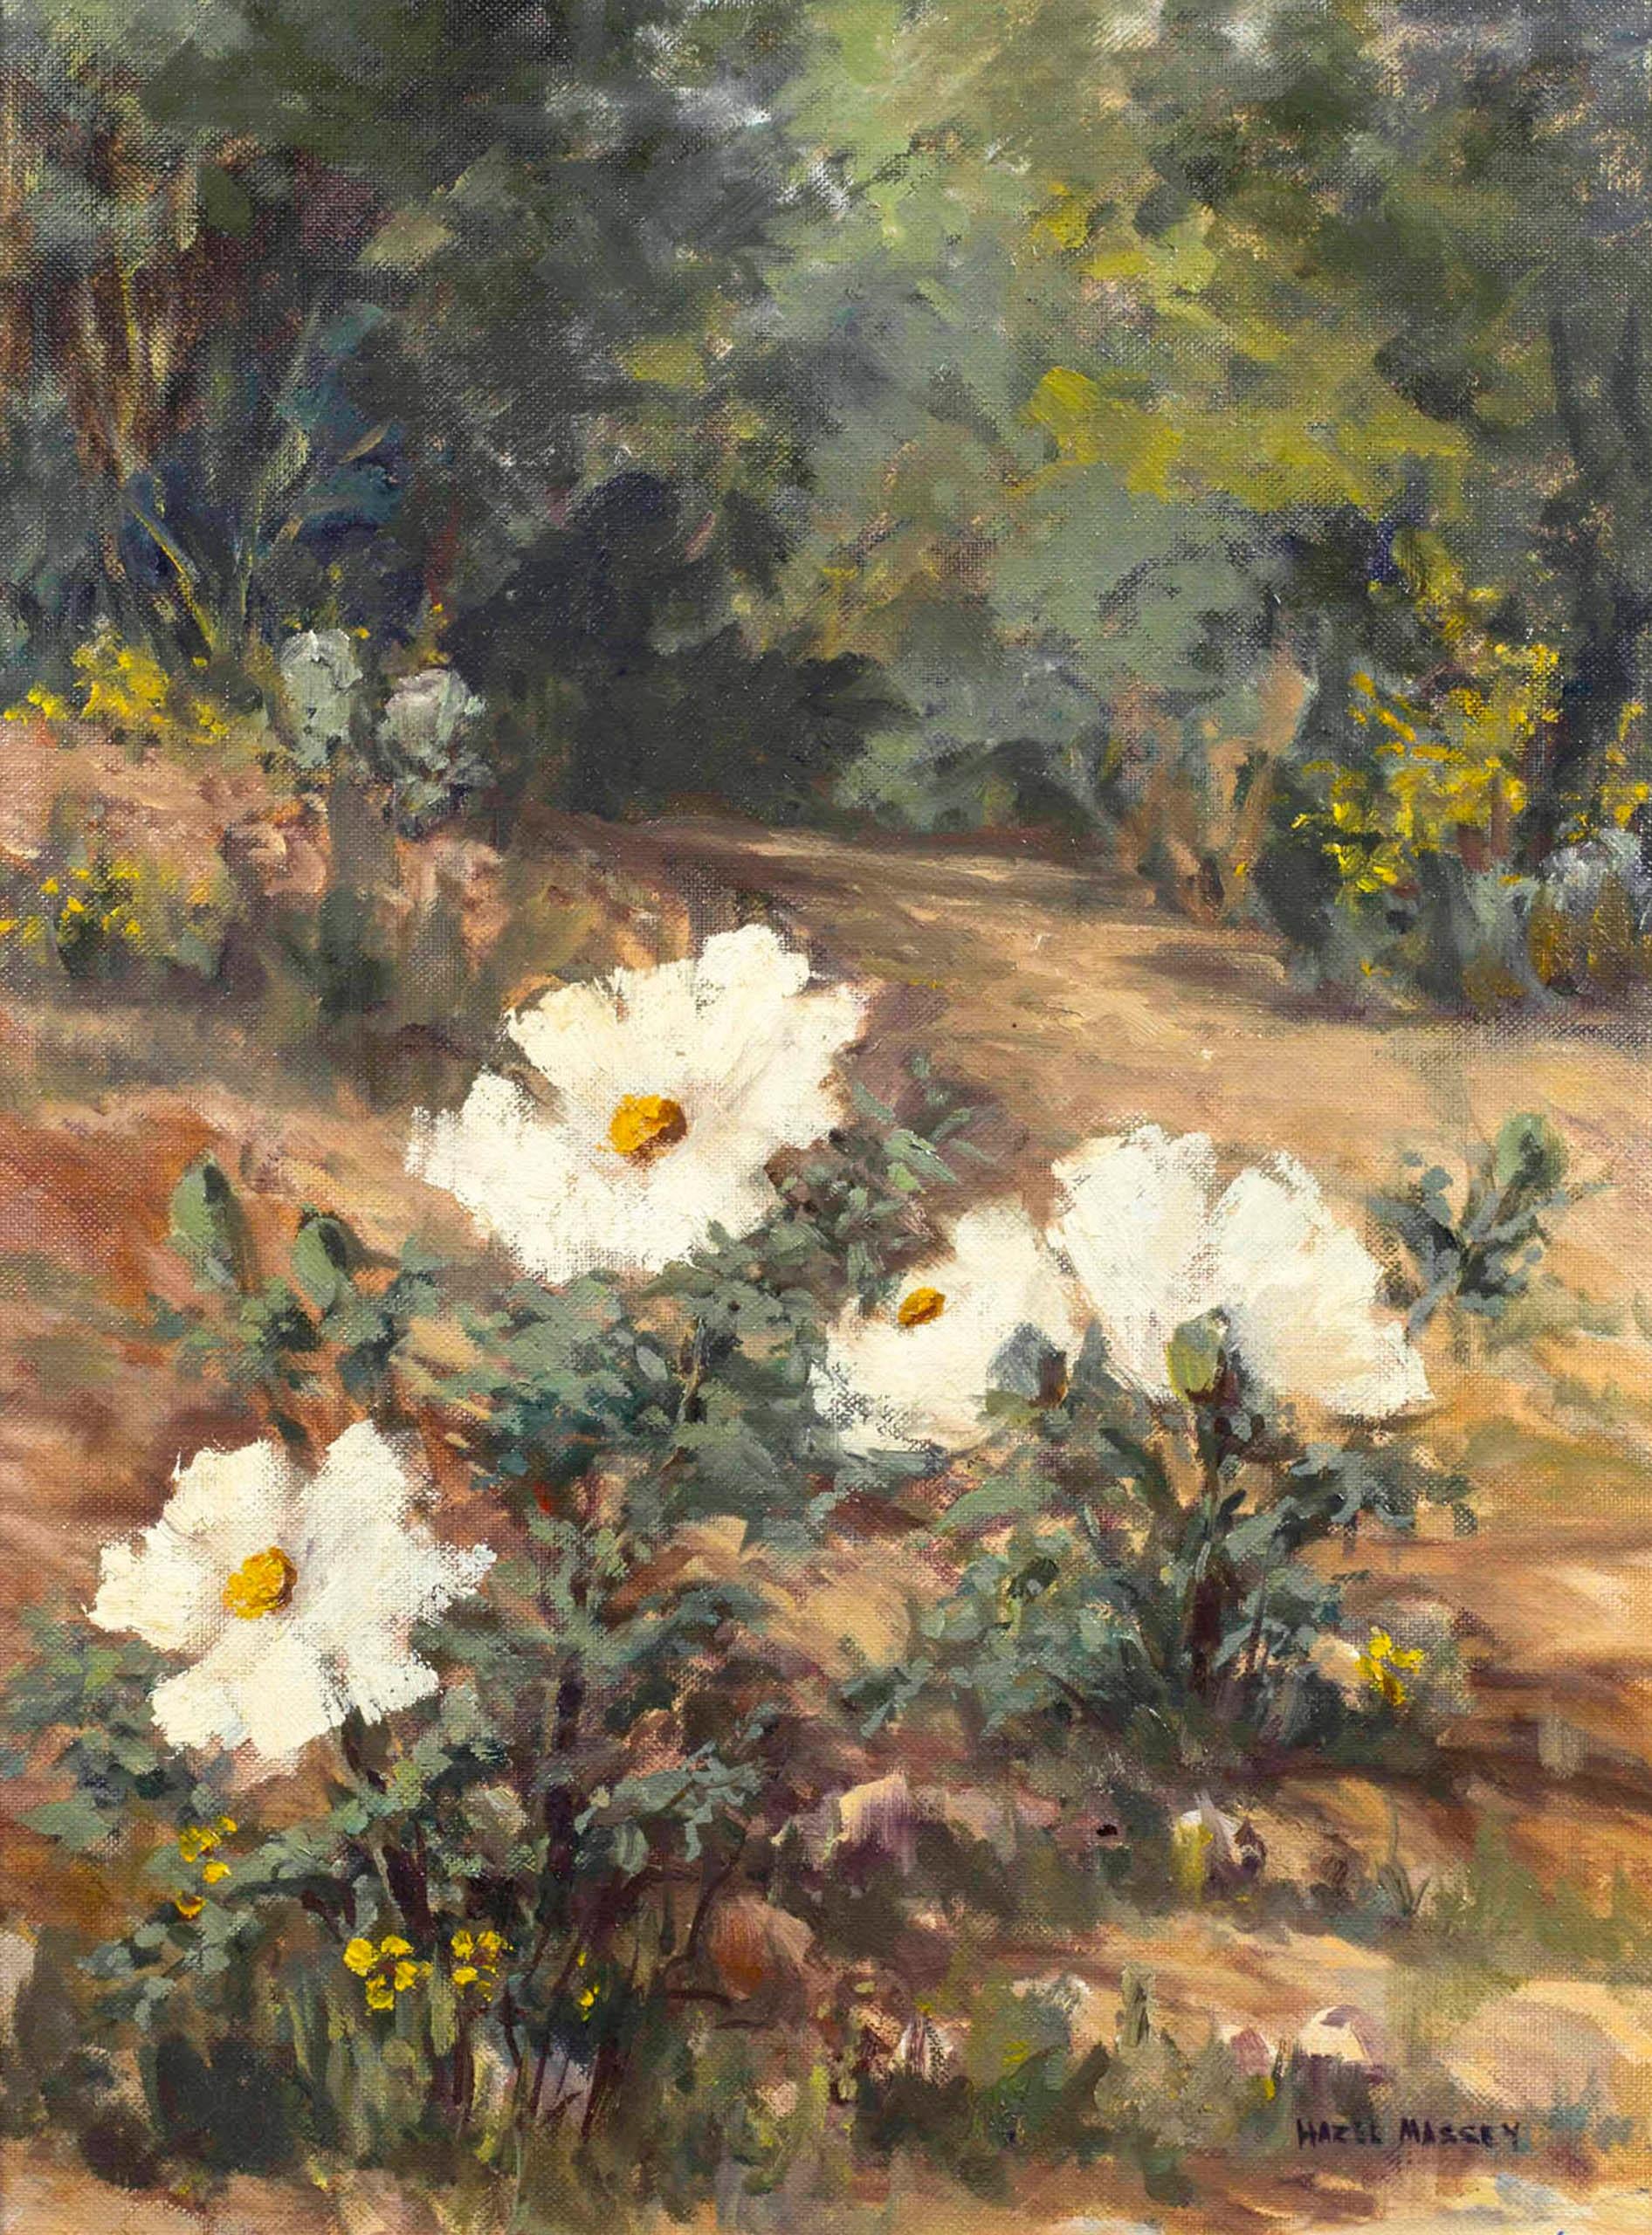 Cherokee Roses, landscape with roses, Texas landscape by American Impressionist historic woman artist, Hazel Massey

Hazel Massey (1907 - 1990)
Cherokee Roses
Oil on canvas board
16 x 12 inches
Signed lower right

Hazel Massey, was born in